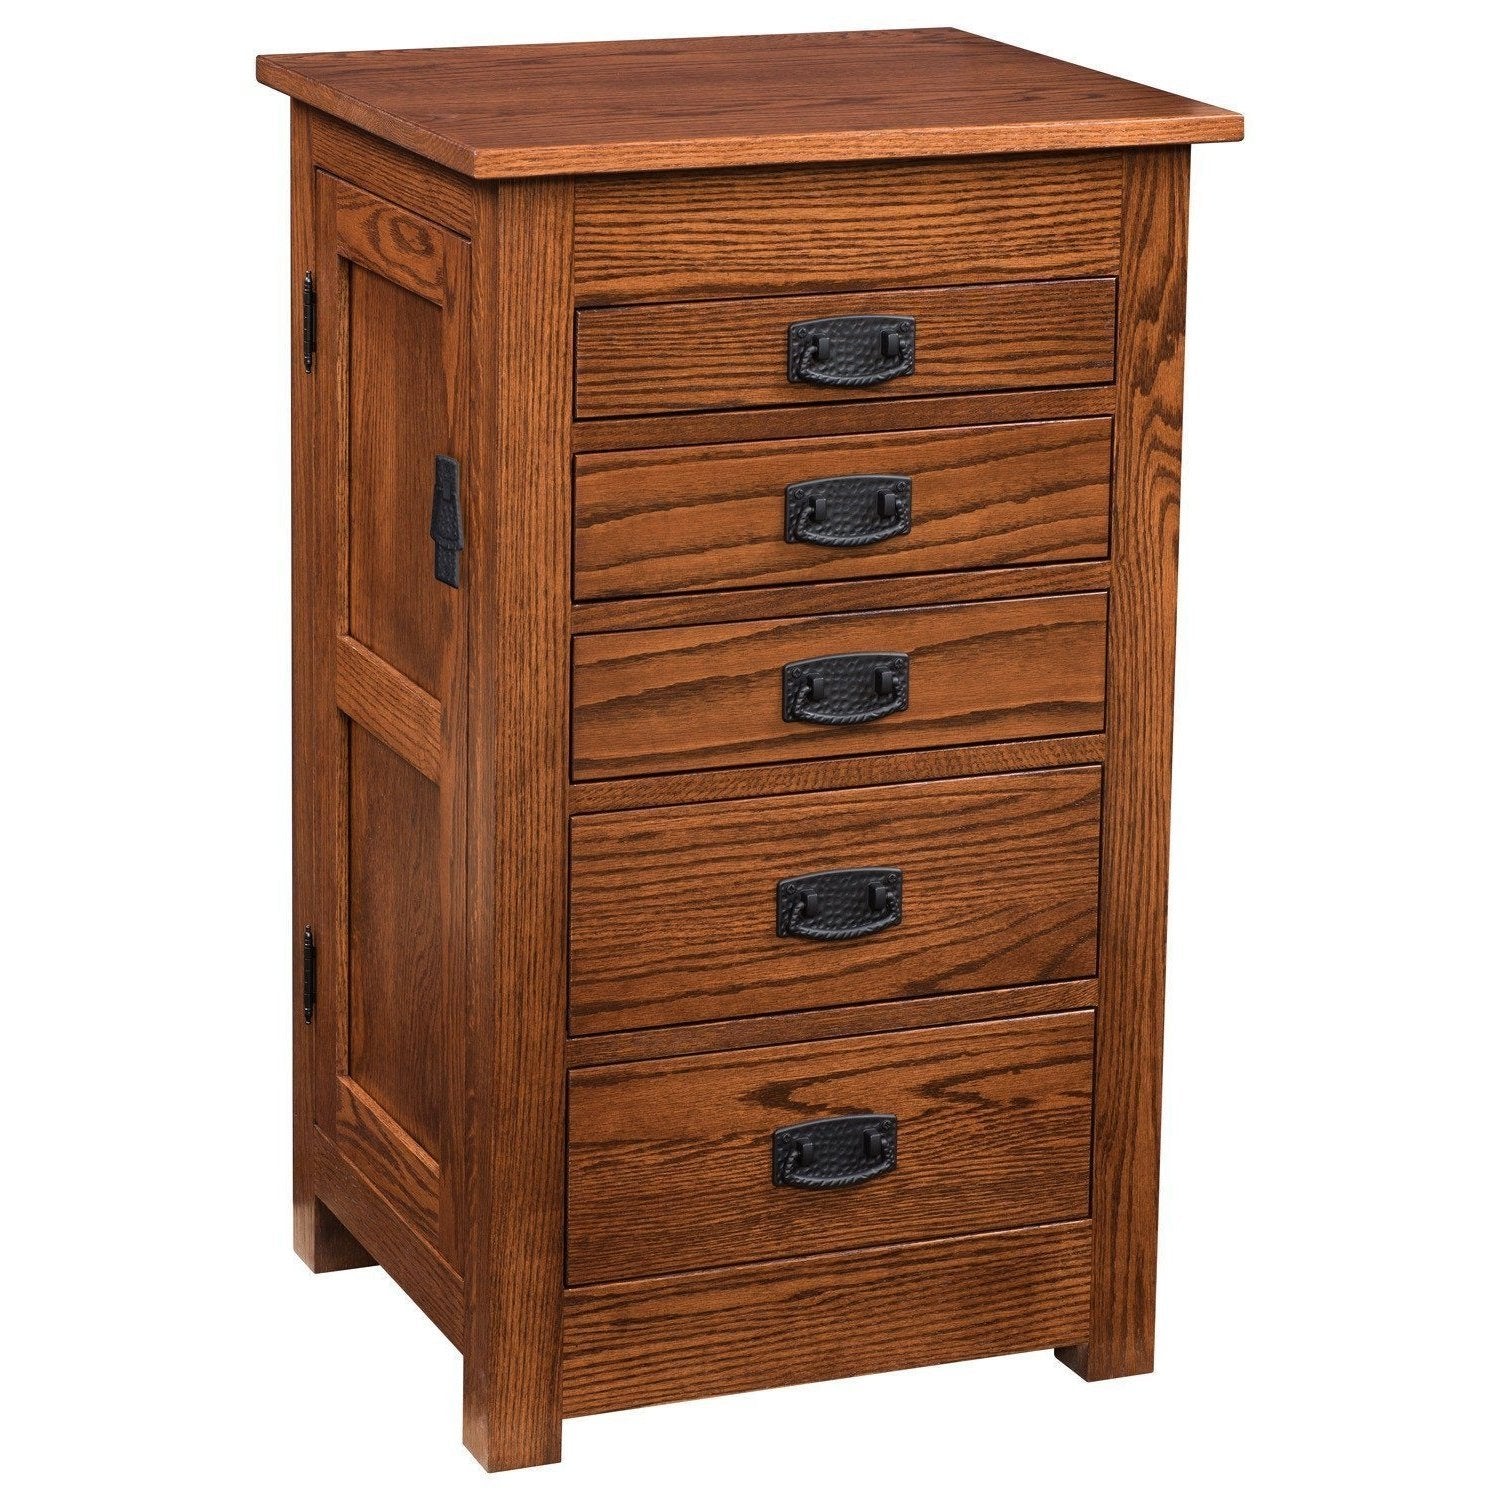 Amish Queen Anne Jewelry Armoire from DutchCrafters Amish Furniture